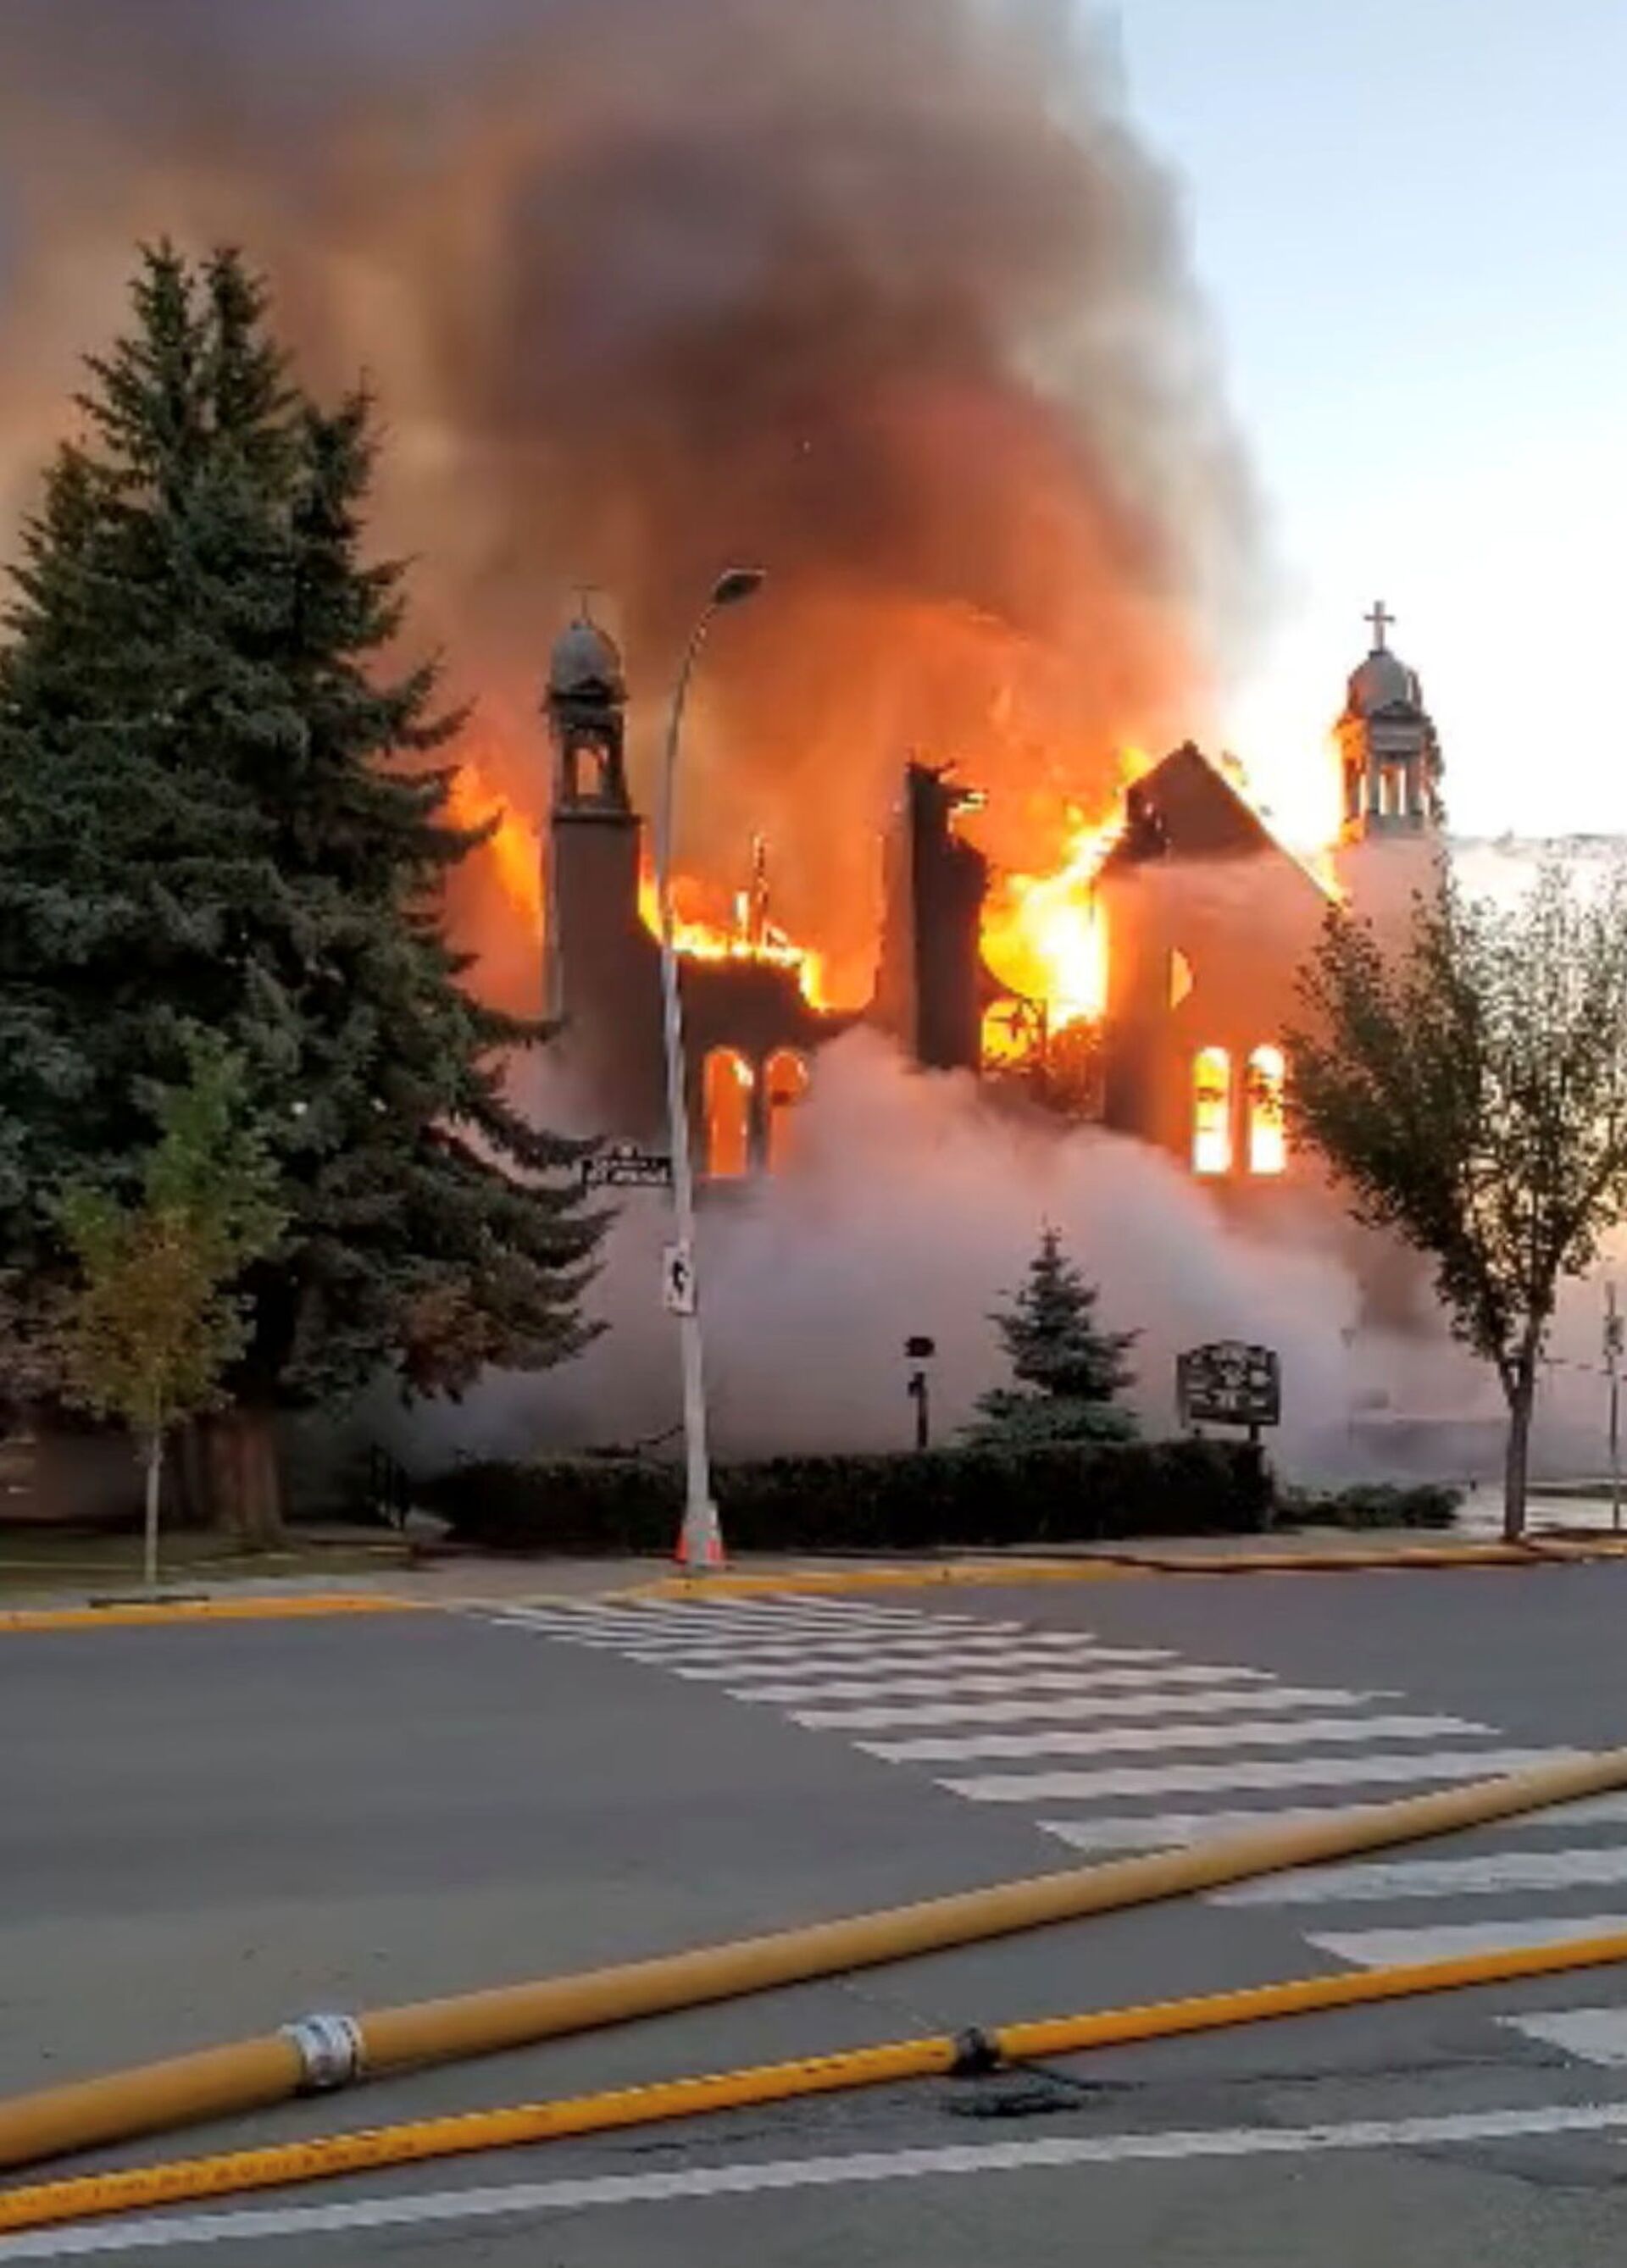 A Catholic church collapses as firefighters work to extinguish the fire at St. Jean Baptiste Parish in Morinville, Alberta, Canada June 30, 2021 in this still image taken form video obtained from social media - Sputnik International, 1920, 07.09.2021